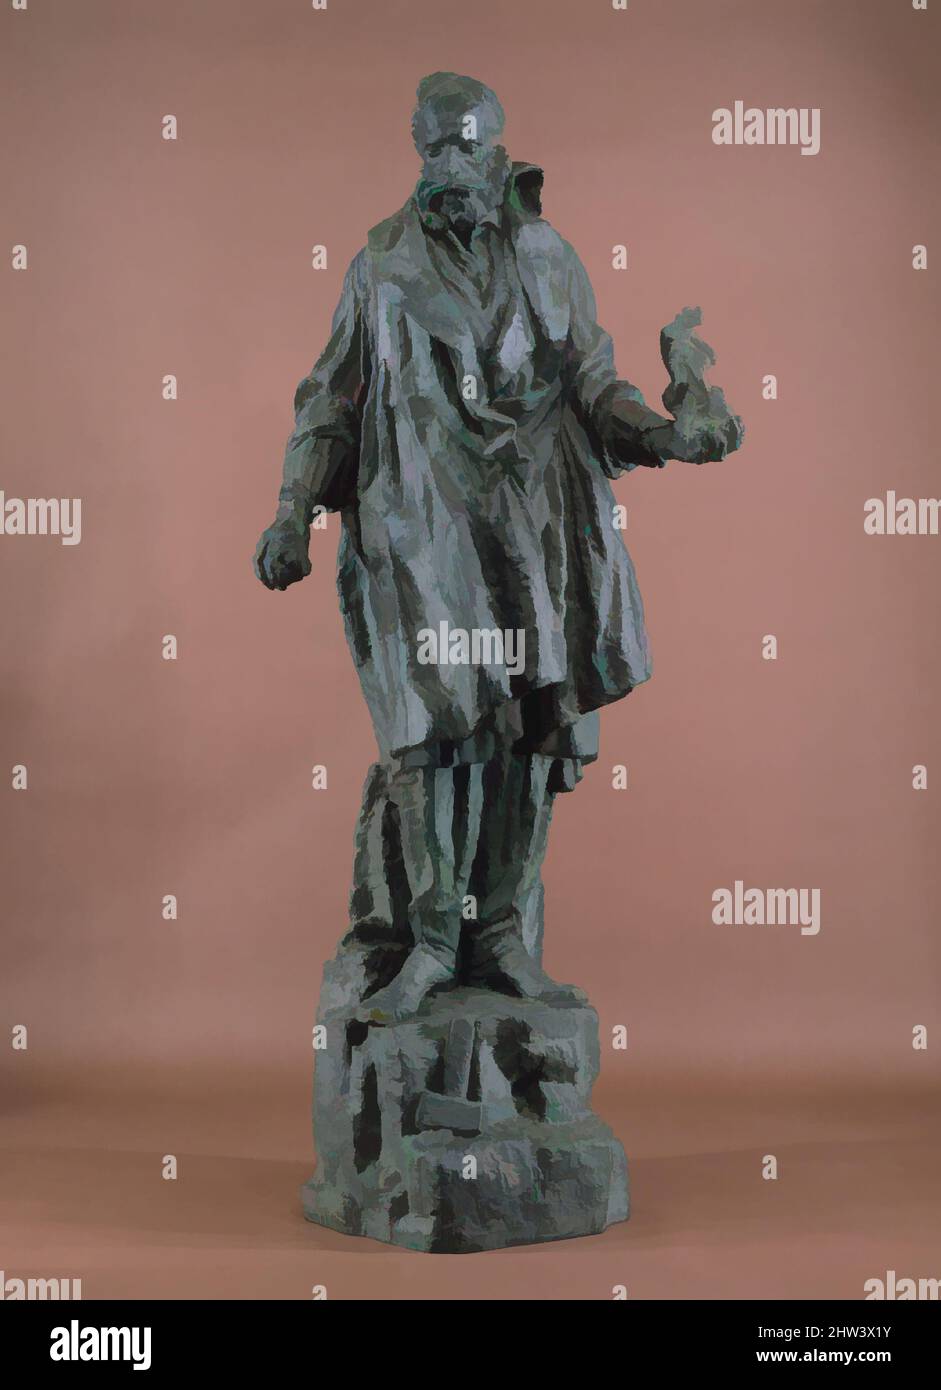 Art inspired by Jean-Baptiste Carpeaux at Work, modeled ca. 1908–9, French, Bronze, Overall: 98 5/16 × 42 × 29 in. (249.8 × 106.7 × 73.7 cm), Sculpture-Bronze, Antoine-Émile Bourdelle (French, Montauban 1861–1929 Vésinet), Bourdelle modeled two monuments to famous French nineteenth-, Classic works modernized by Artotop with a splash of modernity. Shapes, color and value, eye-catching visual impact on art. Emotions through freedom of artworks in a contemporary way. A timeless message pursuing a wildly creative new direction. Artists turning to the digital medium and creating the Artotop NFT Stock Photo